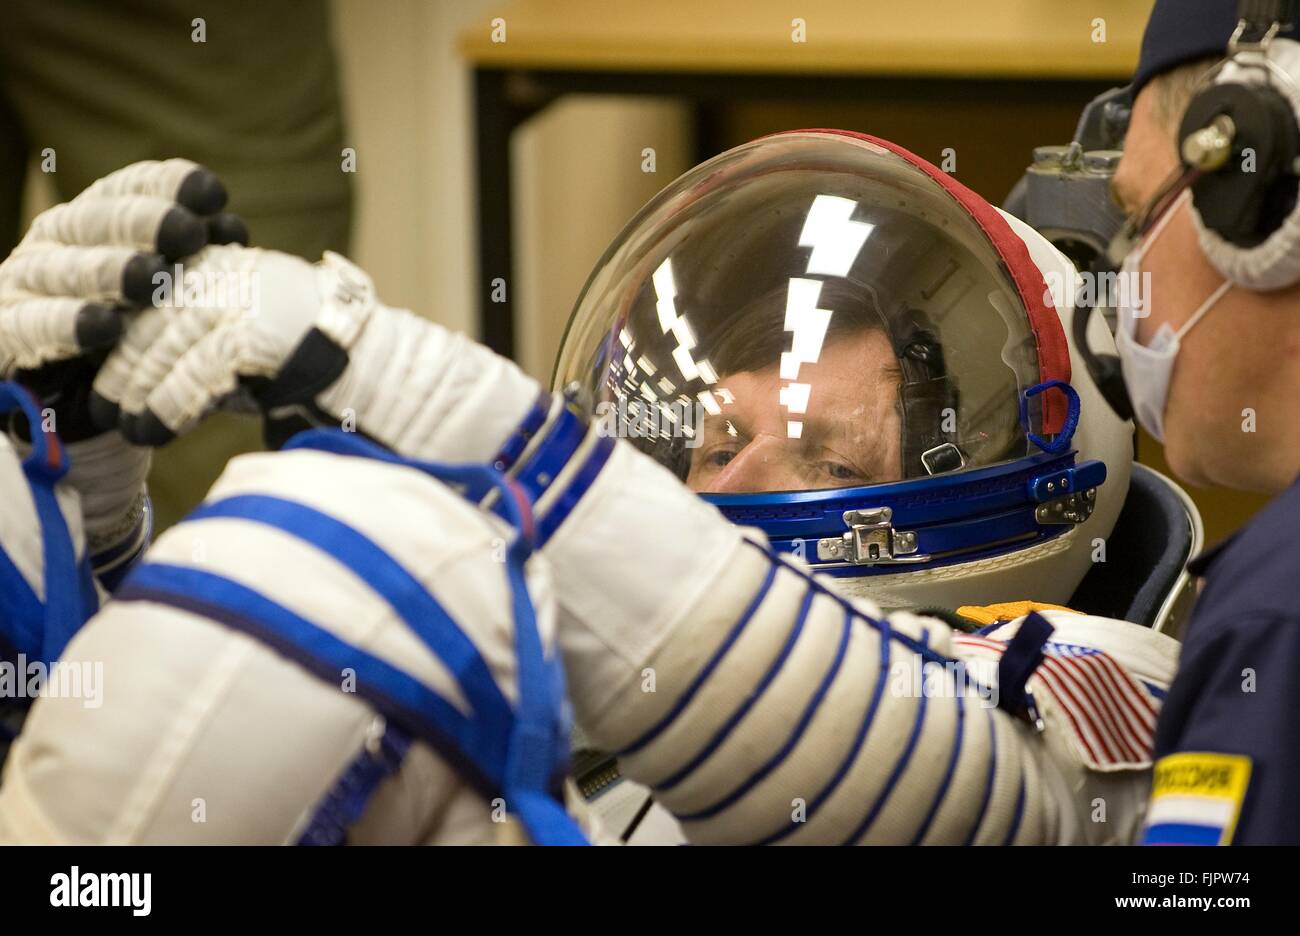 Hungarian-born American space tourist Charles Simonyi has his Russian sokol spacesuit pressure checked ahead of launch onboard the Soyuz spacecraft to the International Space Station Spaceflight on Expedition19 March 26, 2009 in Baikonur, Kazakhstan. Simonyi joins crew members Gennady Padalka and Michael Barratt on the mission. Stock Photo